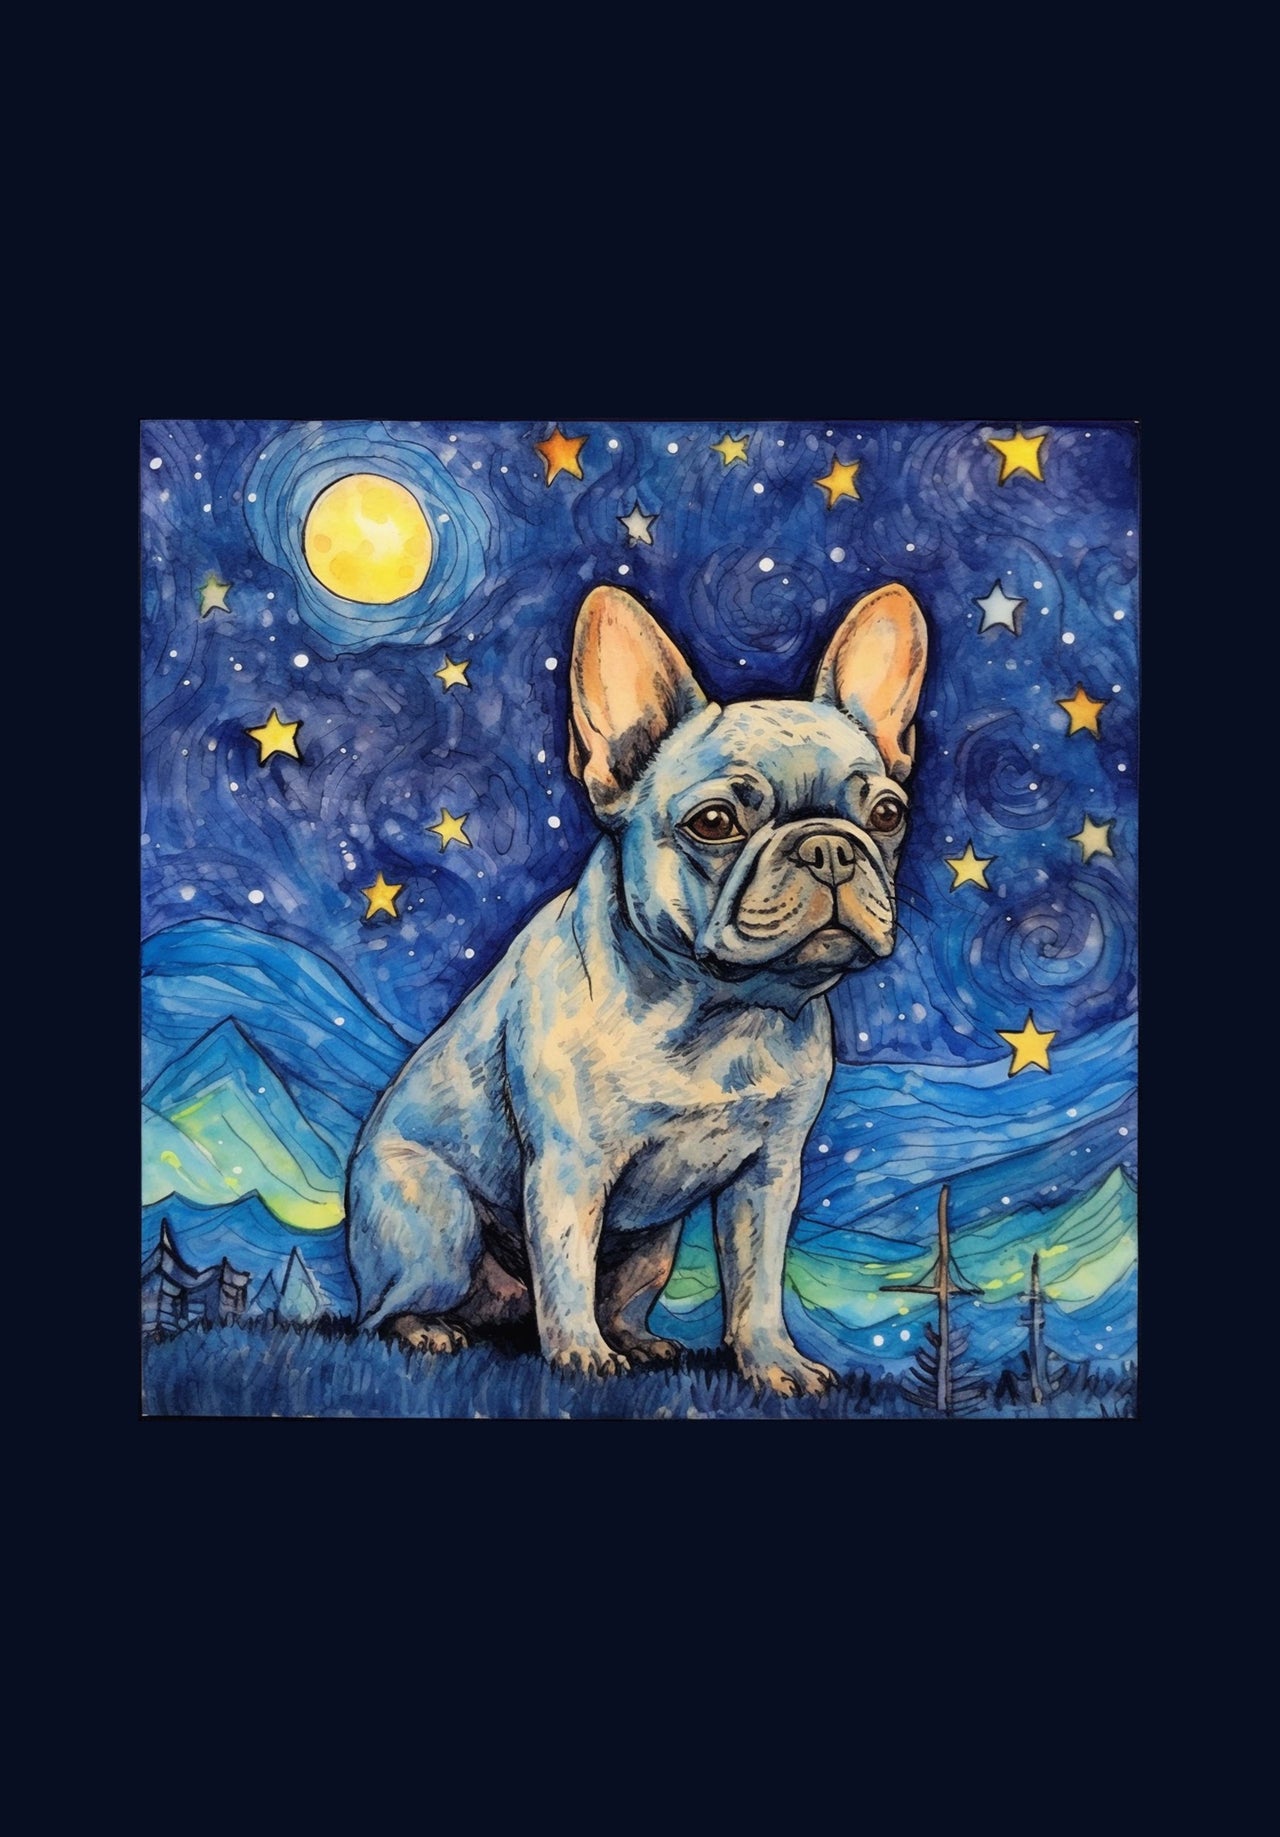 Drawings French Bulldog 02 Van Goh Style Vintage Framed Canvas Prints Wall Art Hanging Home Decor